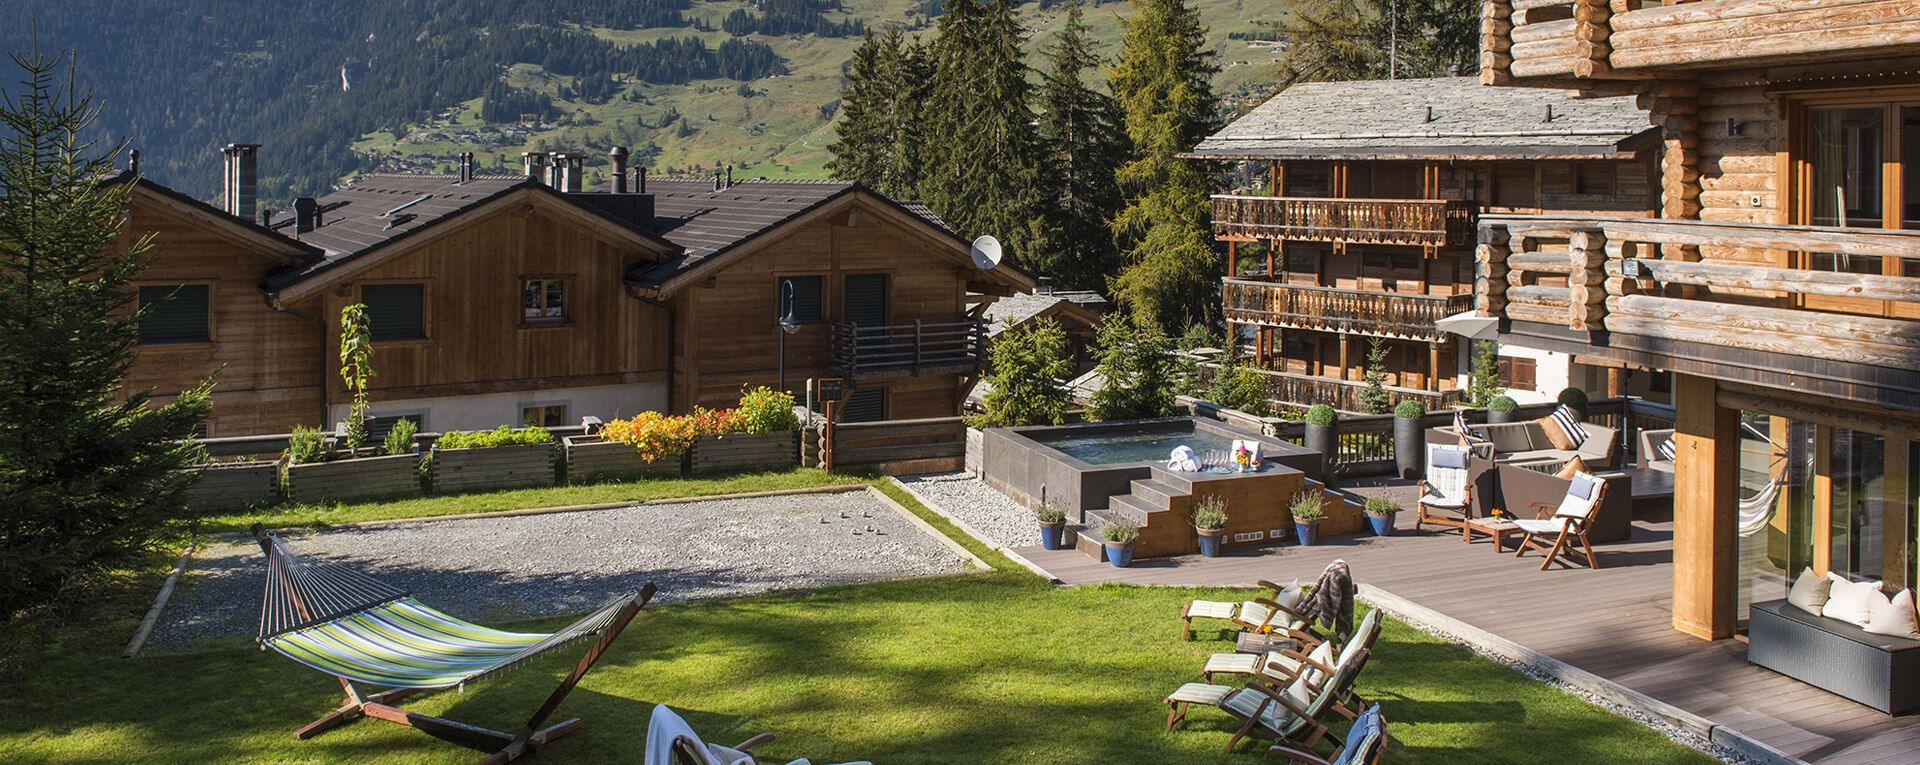 The Lodge at Verbier